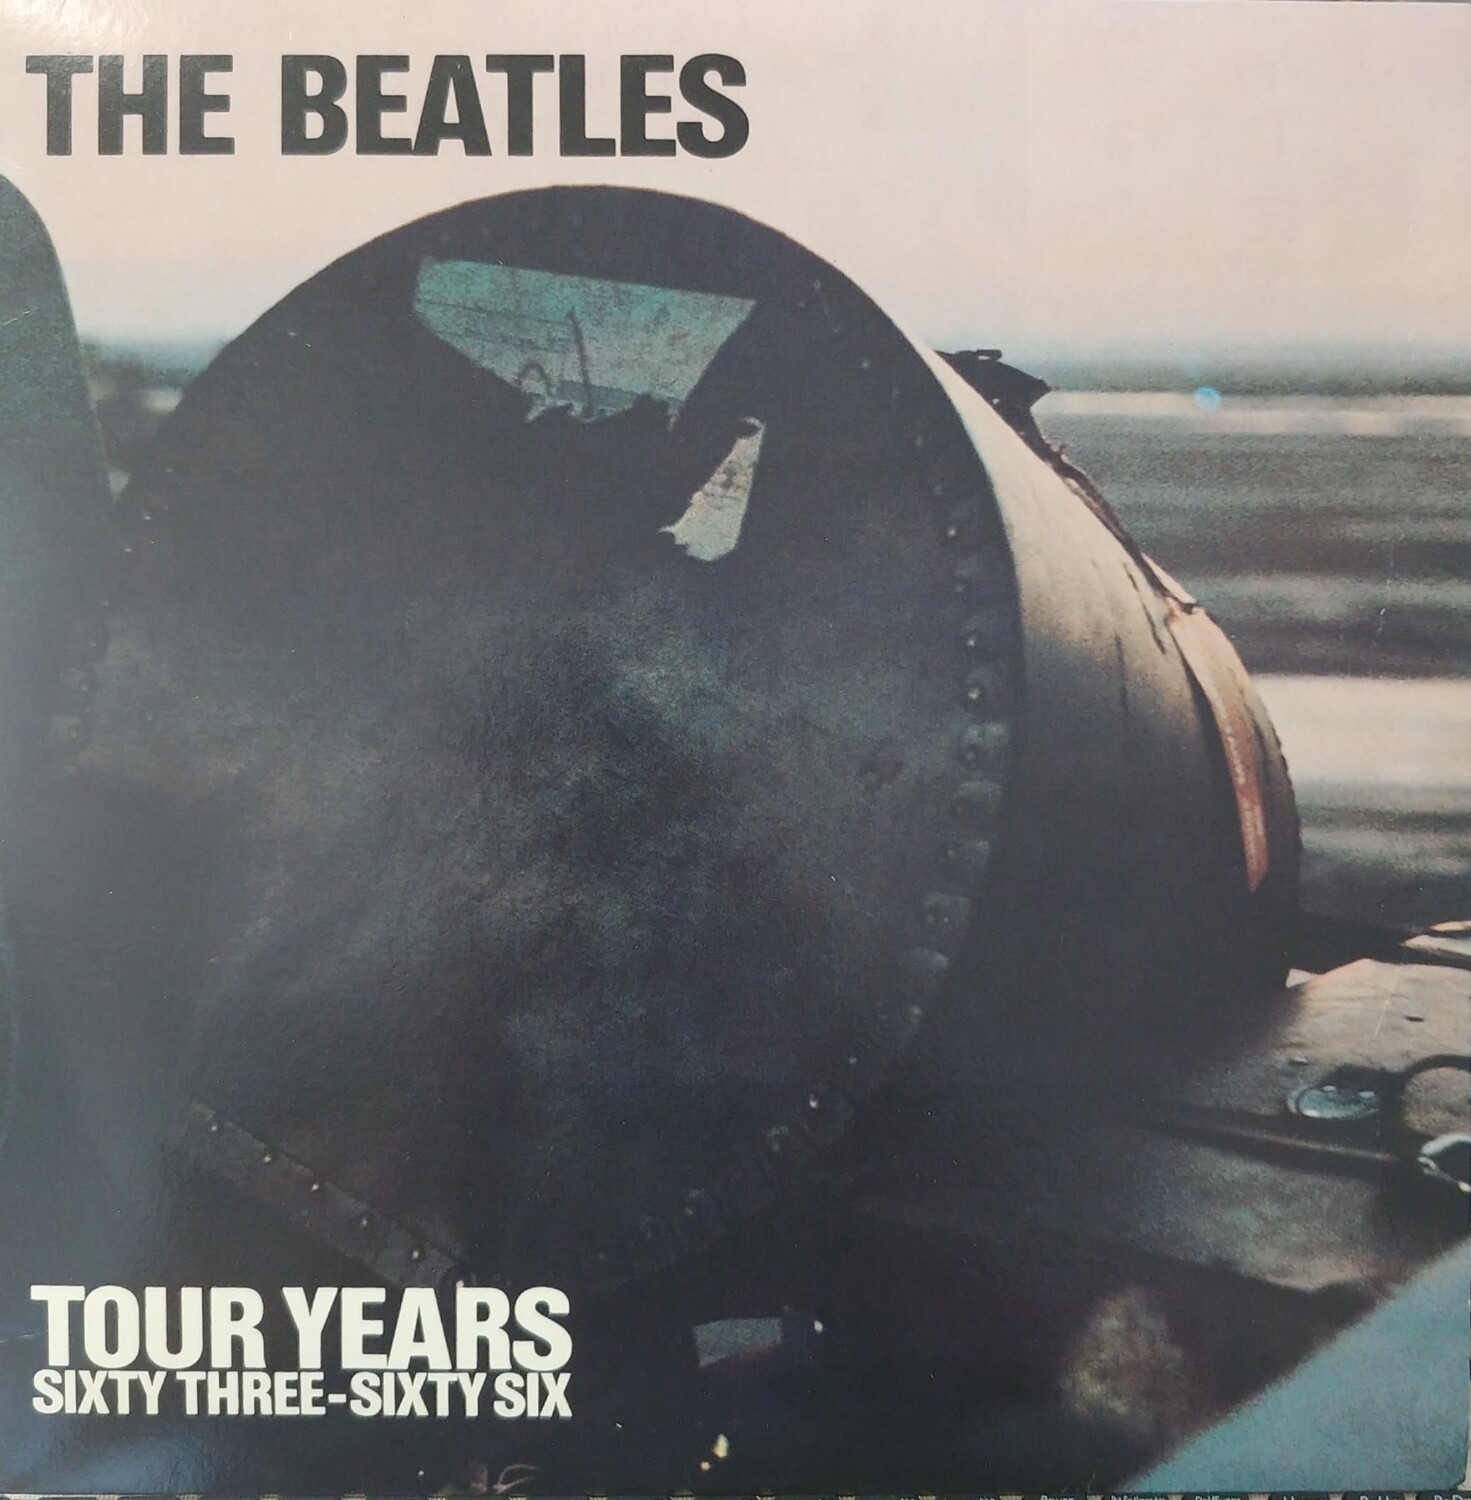 The Beatles - Tour years sixty three-sixty six